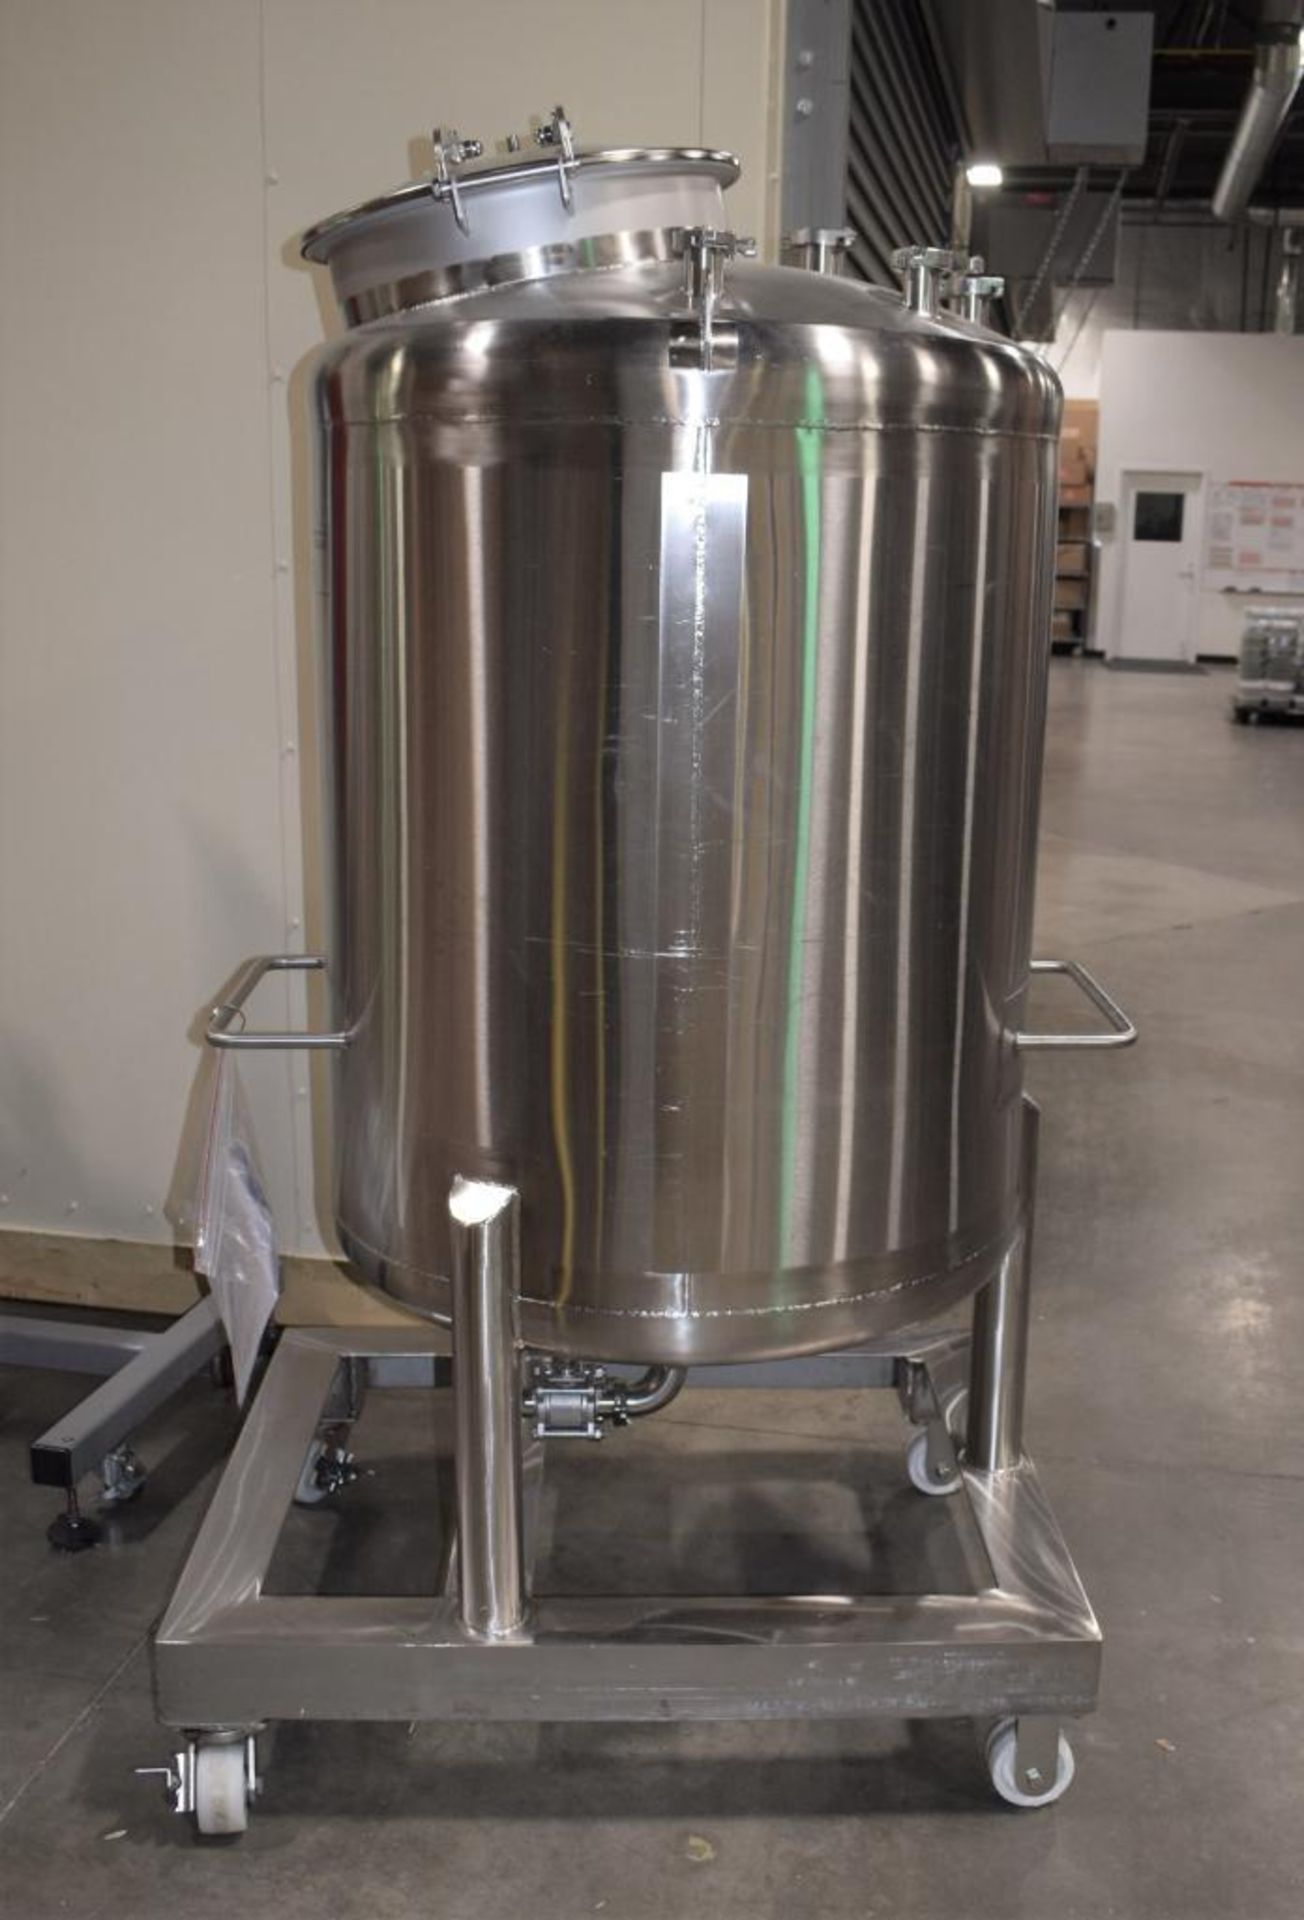 Custom Metalcraft Portable Tank, Approximate 150 Gallon, Model 4A07079200, Stainless Steel. Approxim - Image 2 of 7